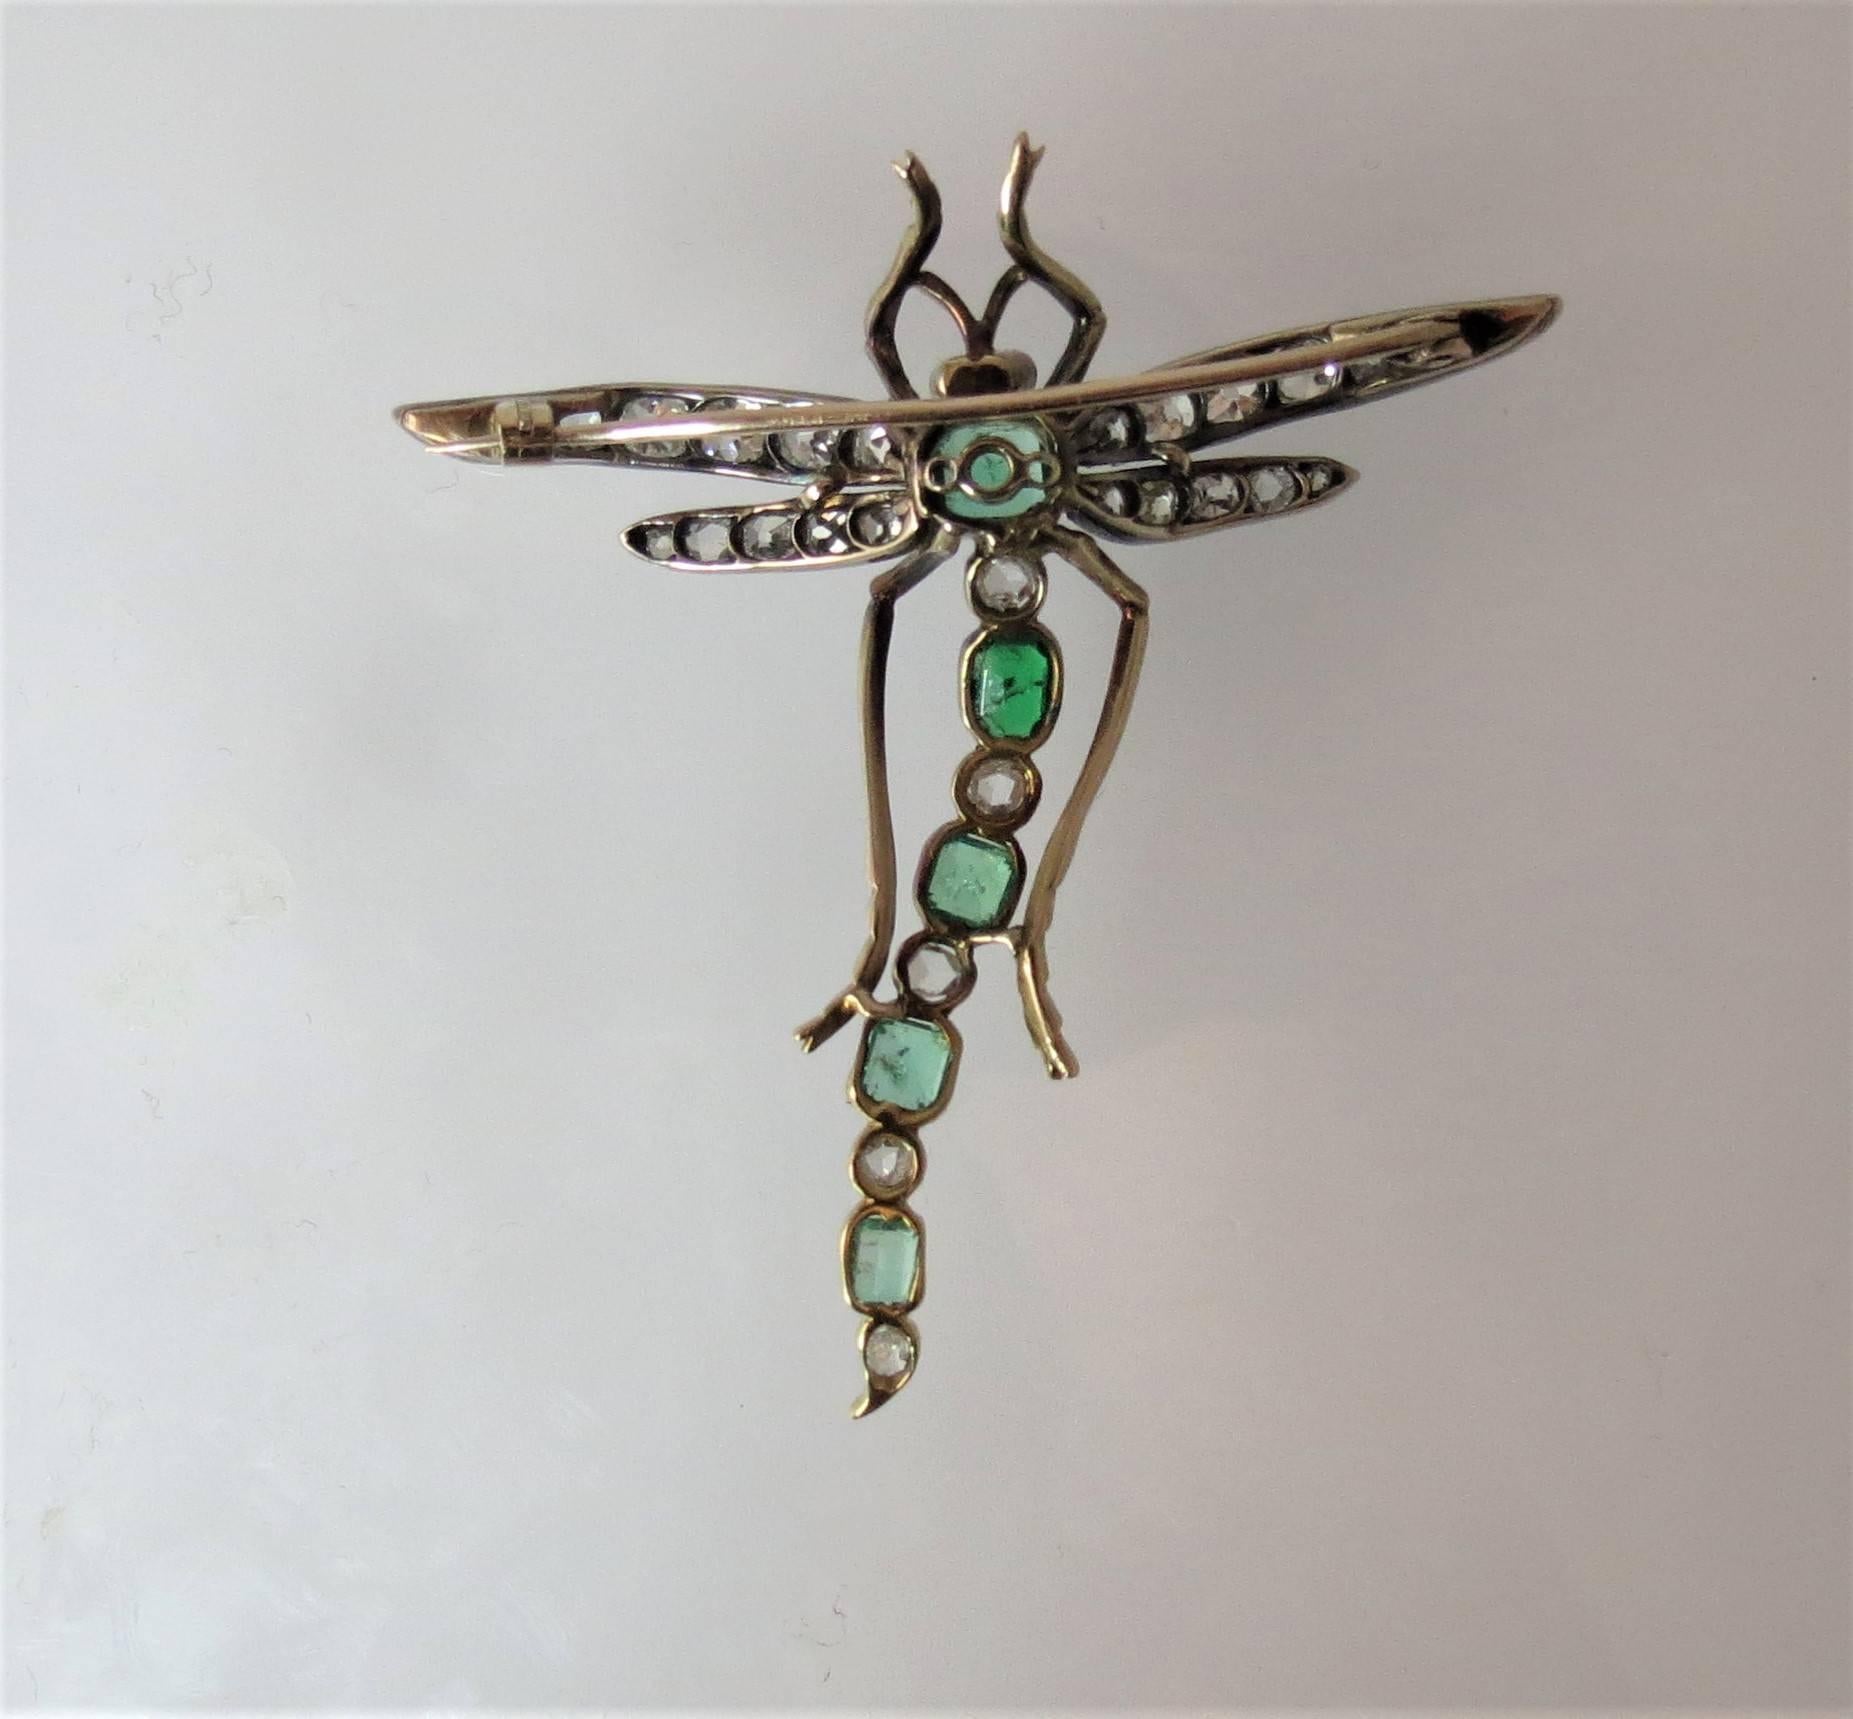 Fabulous vintage 14k yellow gold and silver dragon fly pin set with five faceted green emeralds weighing about 2.20cts and 33 rose cut and old mine cut diamonds weighing about 2.80cts, with two cabochon garnet eyes.